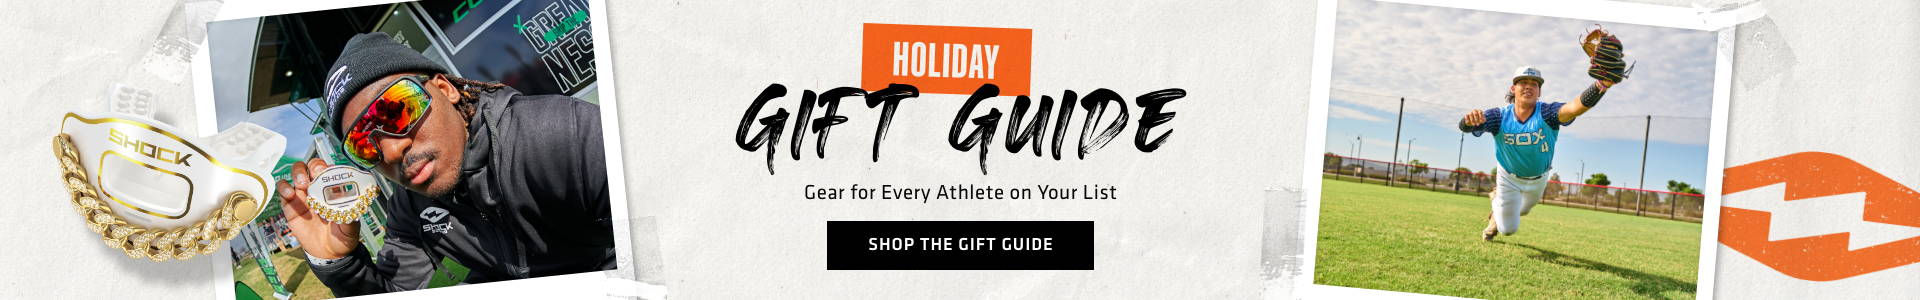 ShocK Doctor Holiday Gift Guide